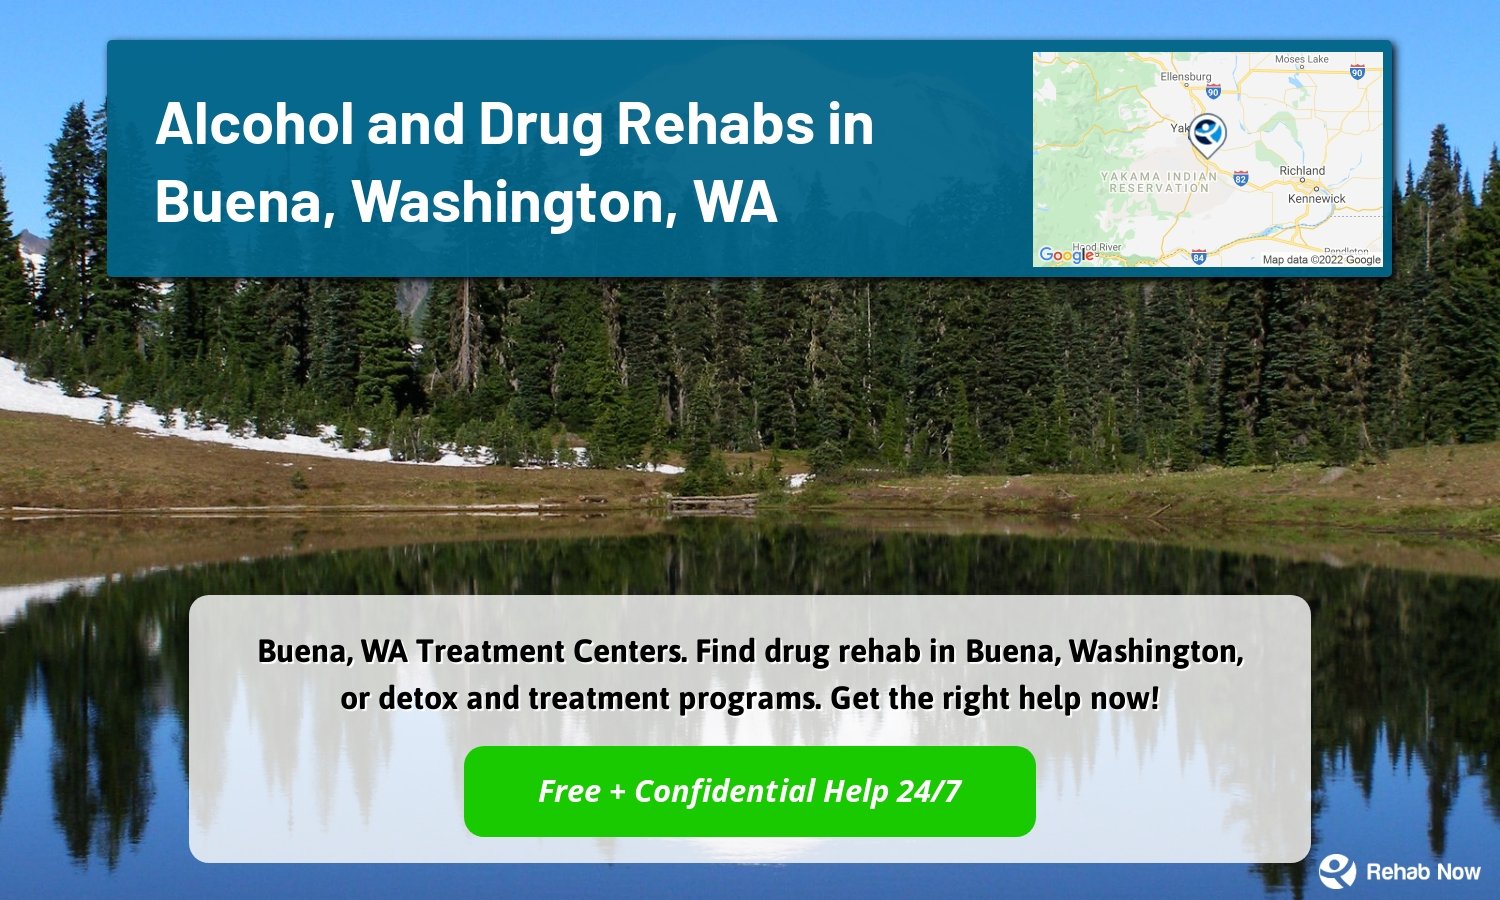 Buena, WA Treatment Centers. Find drug rehab in Buena, Washington, or detox and treatment programs. Get the right help now!